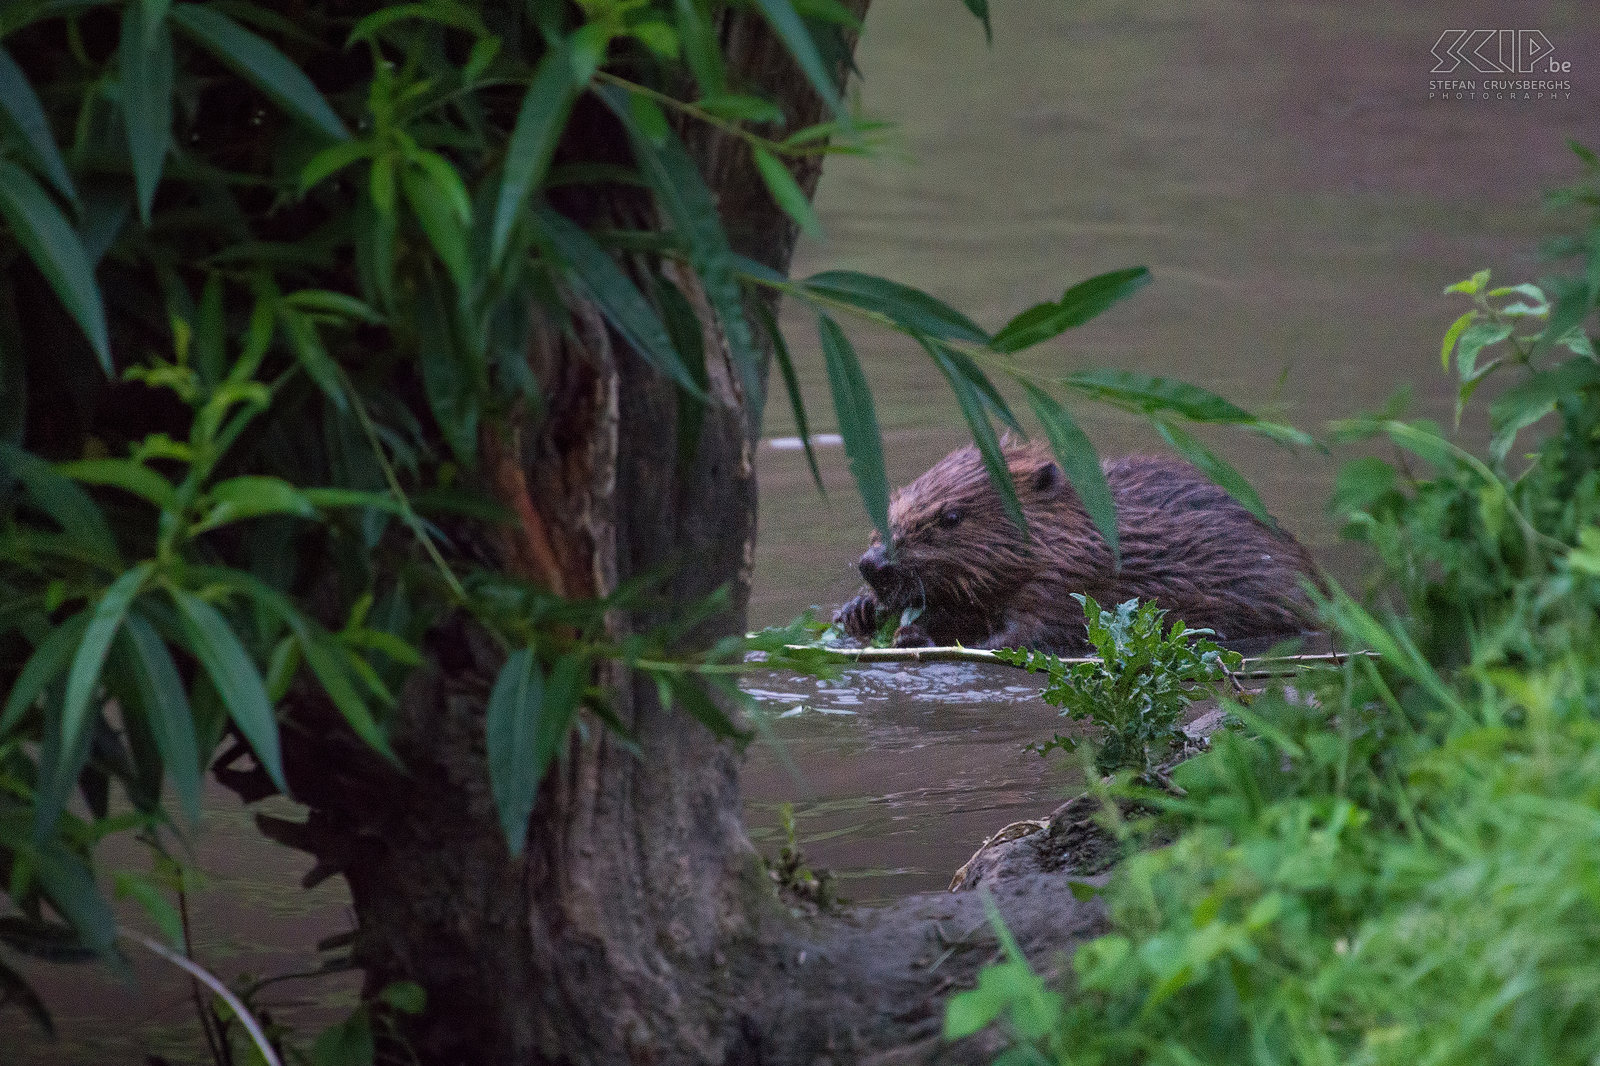 Beavers of Leuven In June a beaver family of four animals housed in the Dyle river near the Begijnhof in the center of city of Leuven. The beaver (castor fiber) is the largest rodent in Europe and is now back in Belgium in some places. Beavers are nocturnal and generally very shy. But these beavers showed up at dusk and were not disturbed by the many people who where watching them dragging and eating branches. In early July however they were chased. Stefan Cruysberghs